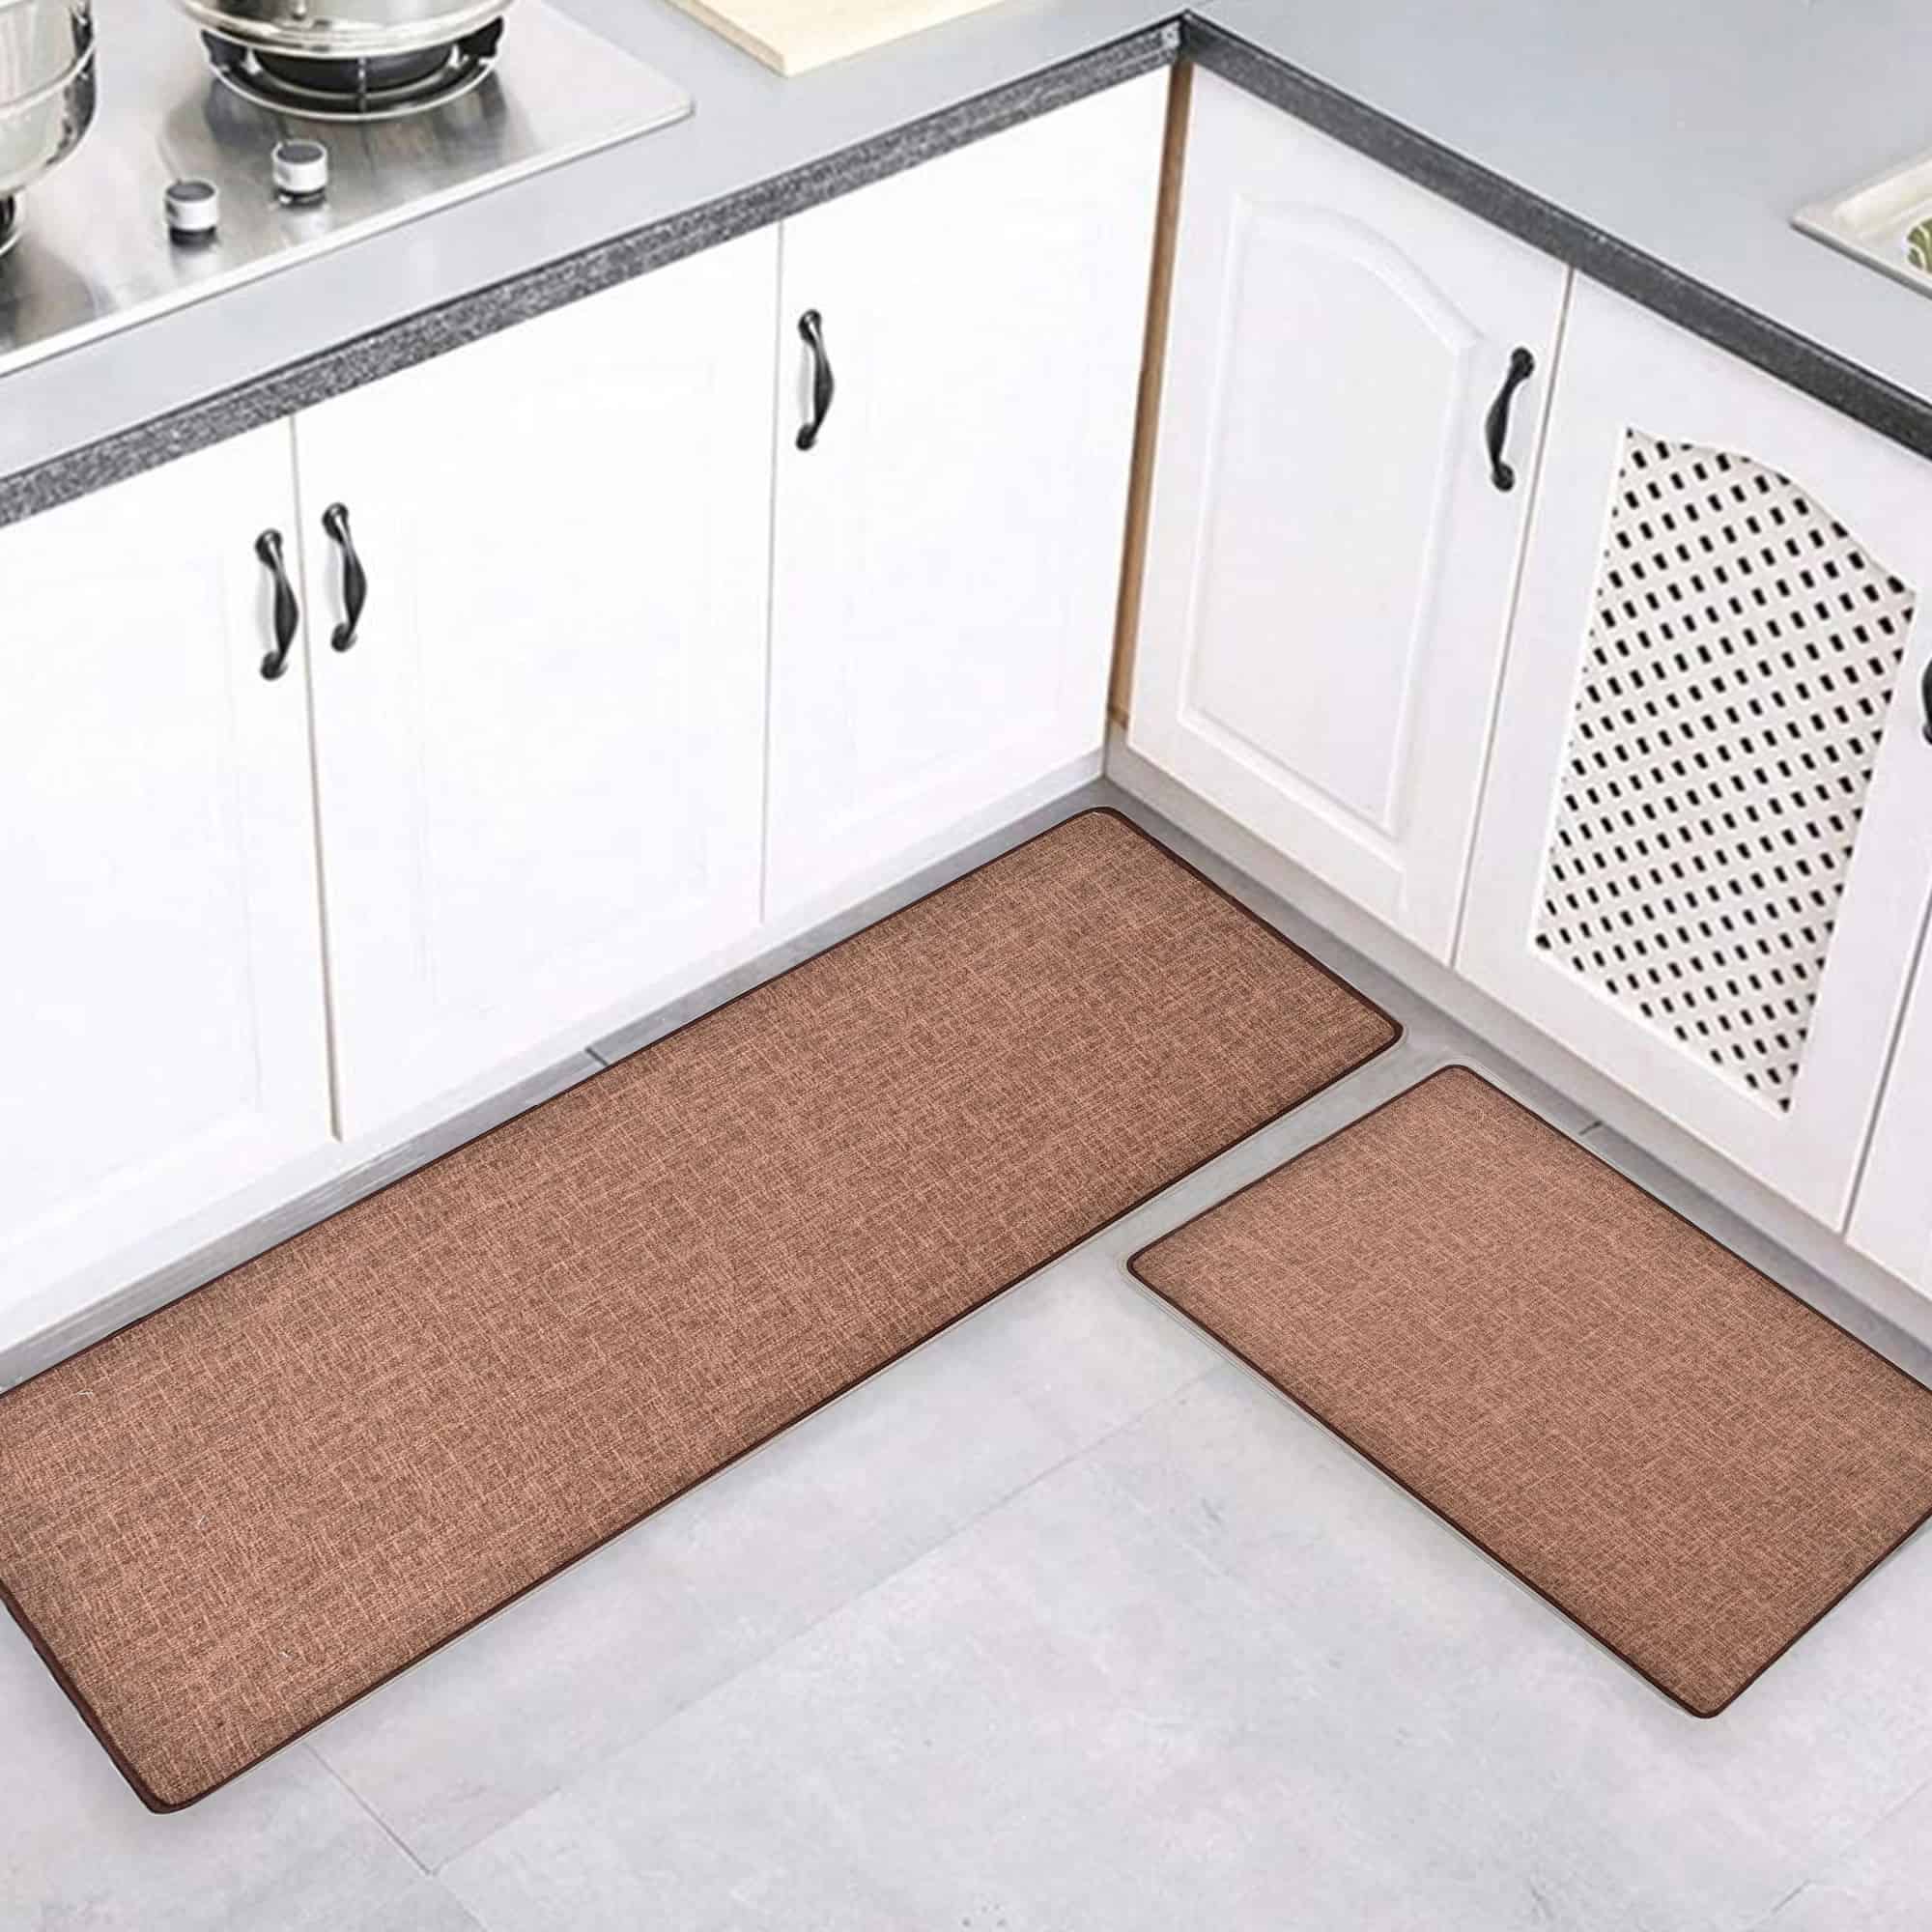 Chic Cutlery Print Red Wool-Effect Kitchen Mat and Runner Rug Set of 2